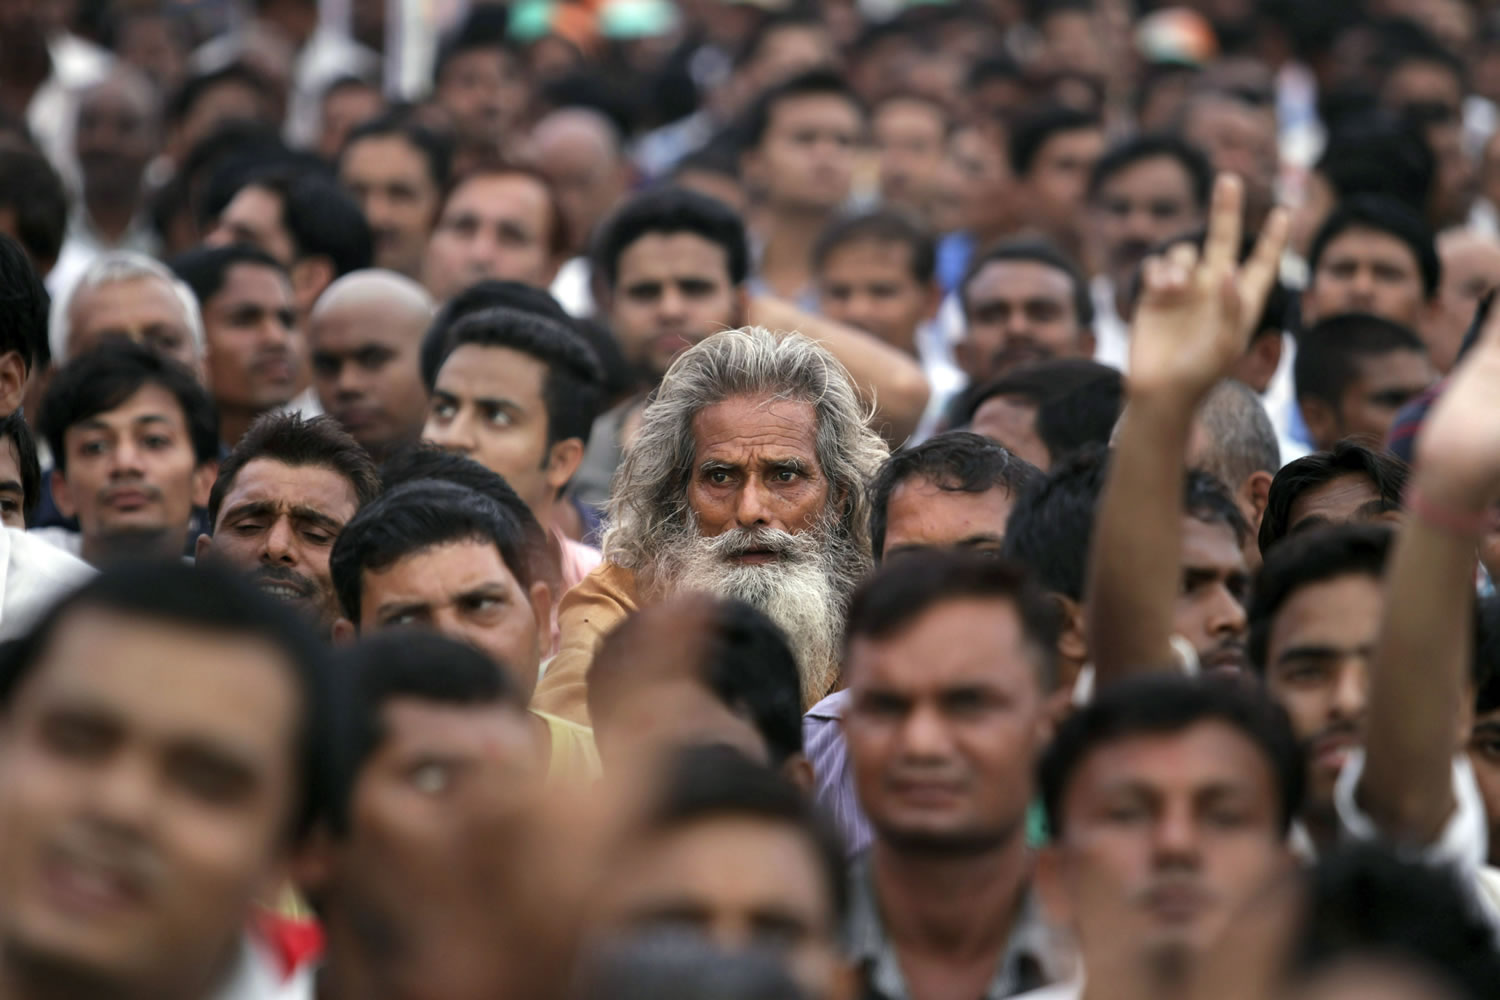 An elderly man listens to a speaker at a political rally in New Delhi.